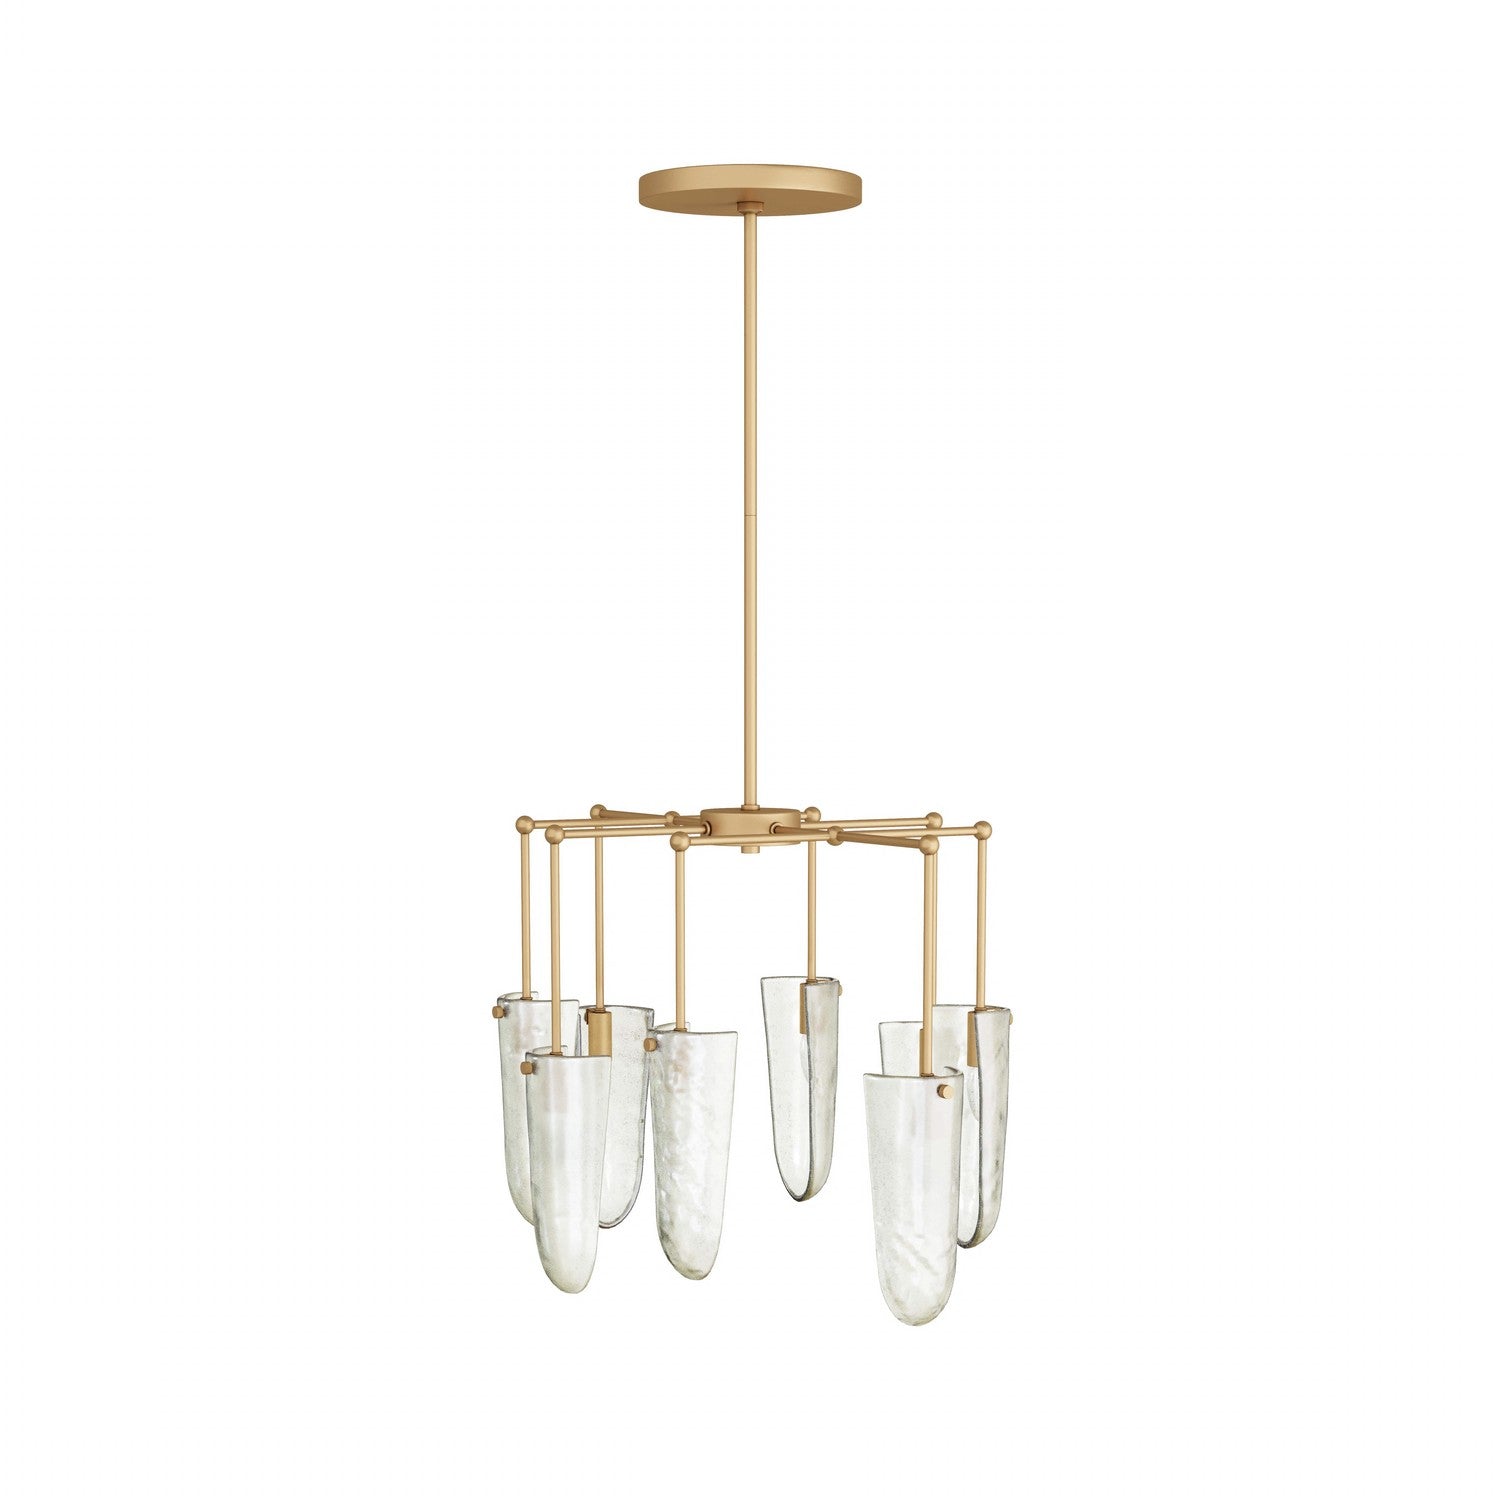 Eight Light Chandelier from the Valeria collection in Clear Seedy finish